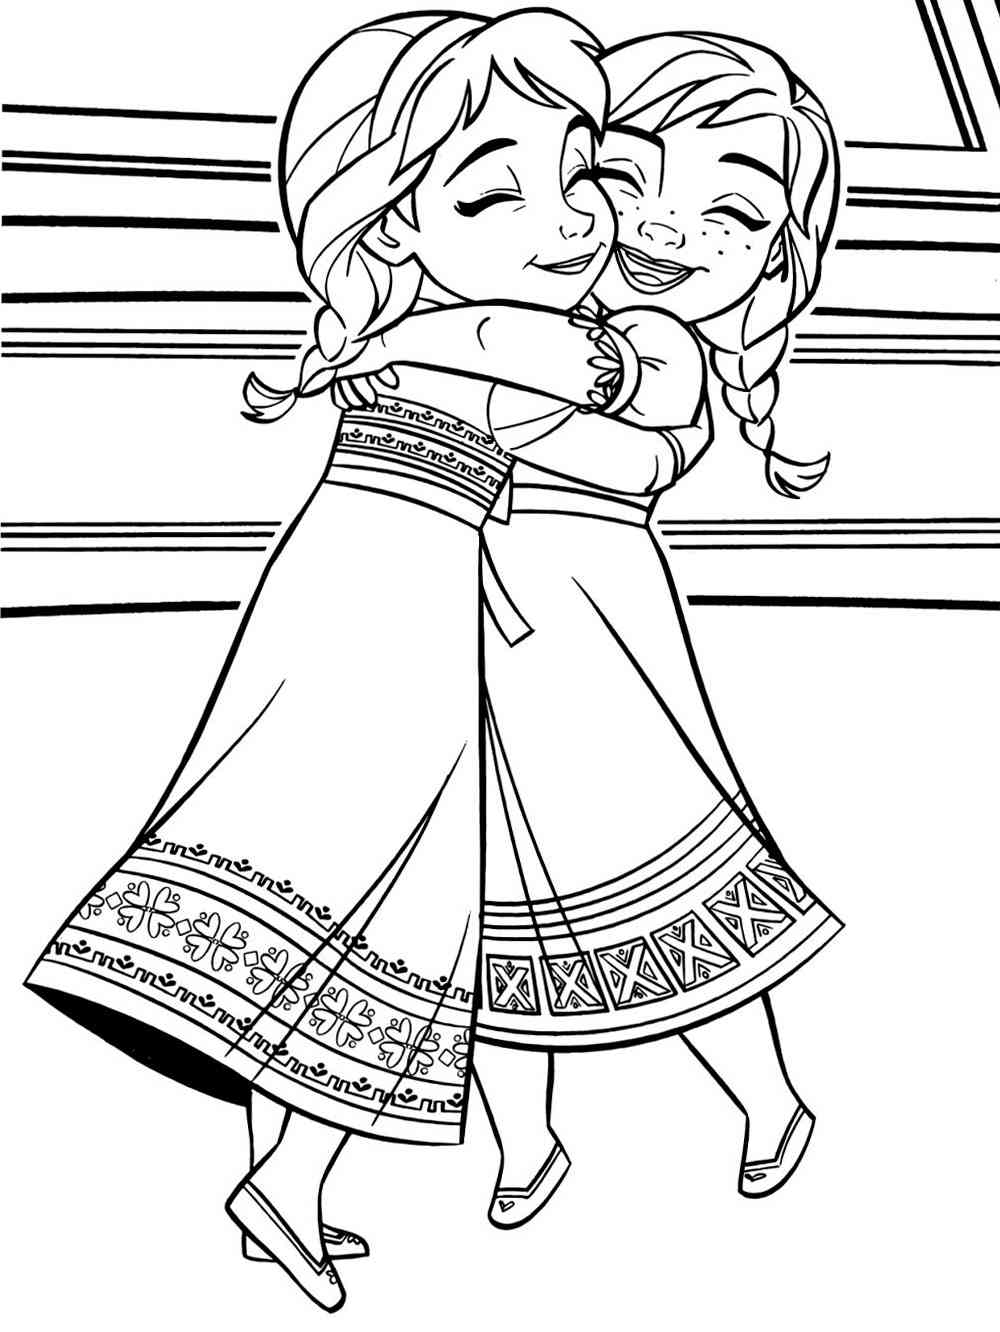 Elsa & Anna coloring pages